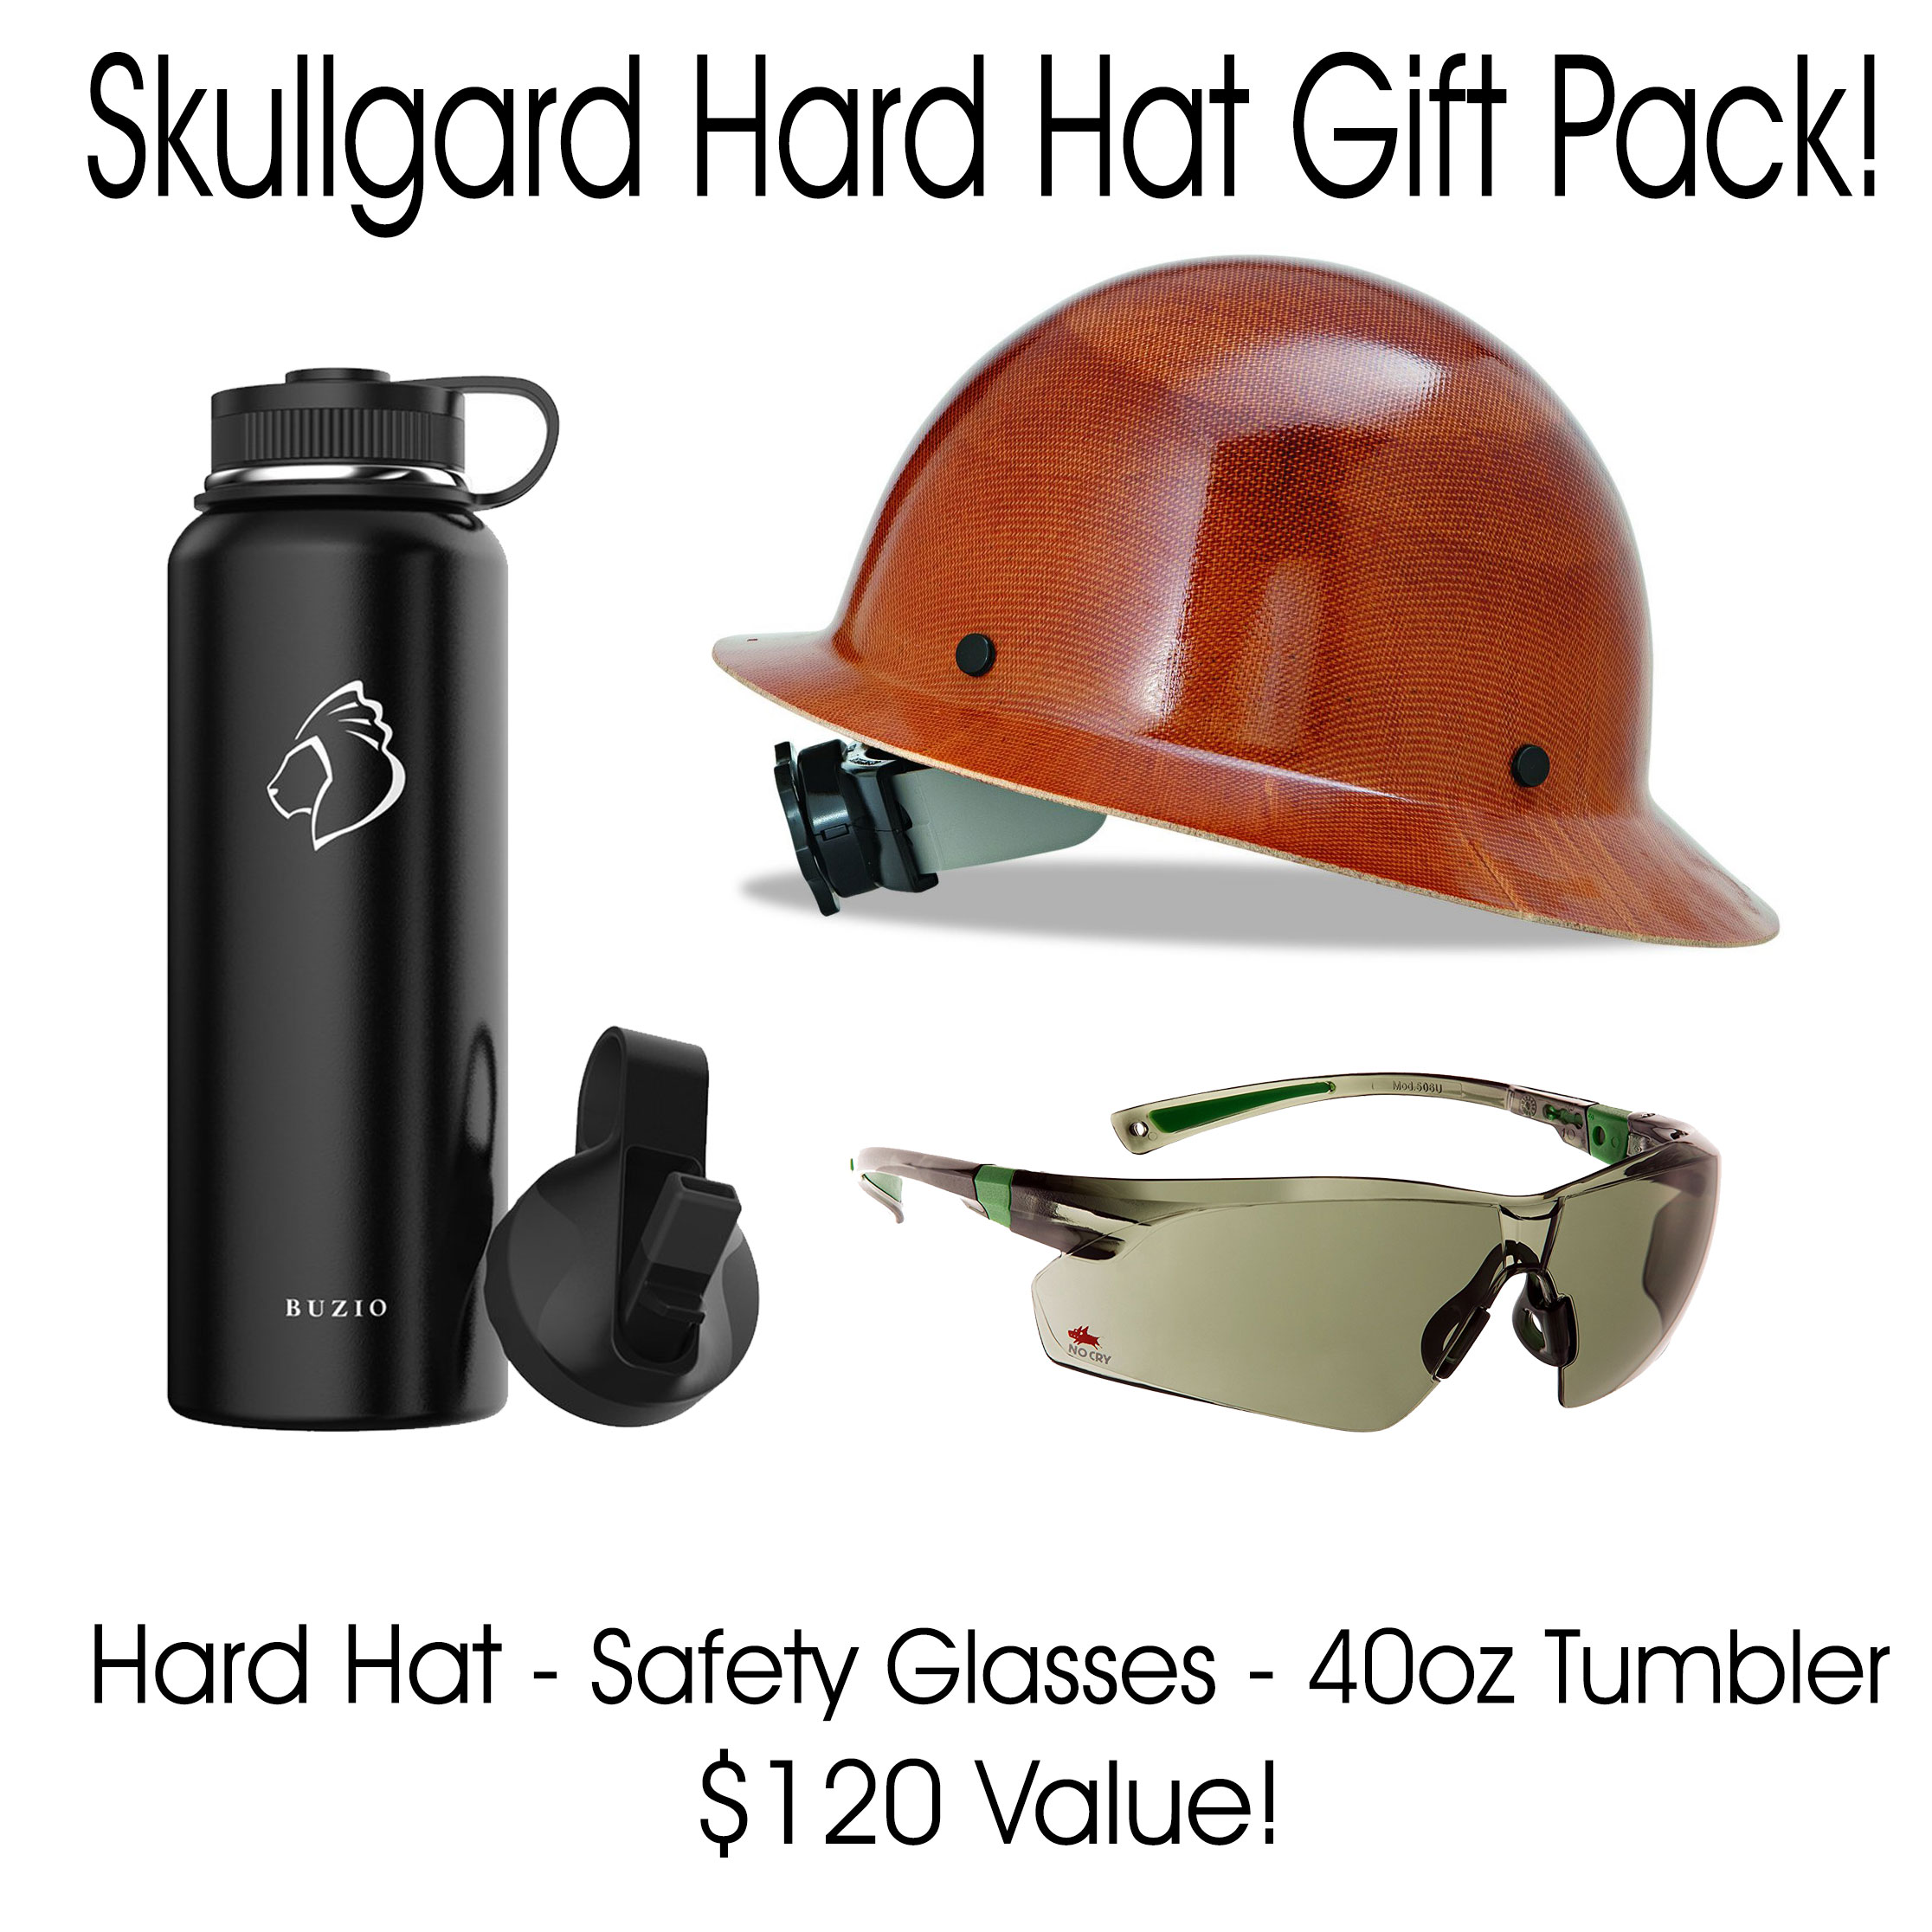 Hard Hat Gift Package